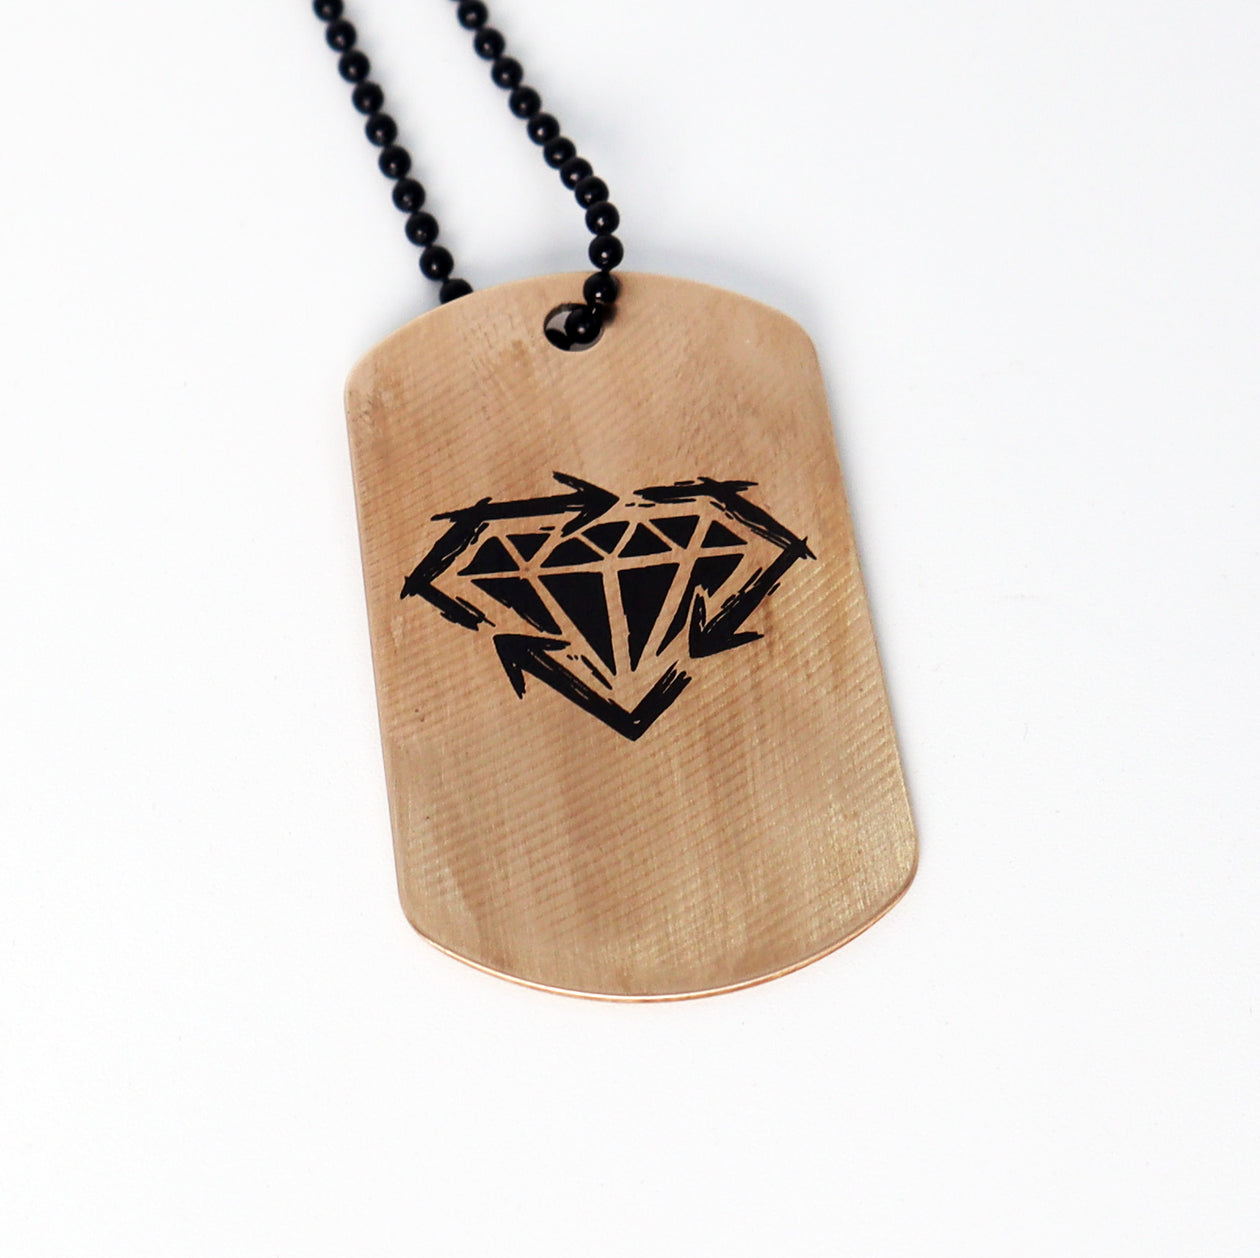 Stick To Your Guns Diamond Dogtag - Reclaimed Cymbal Necklace